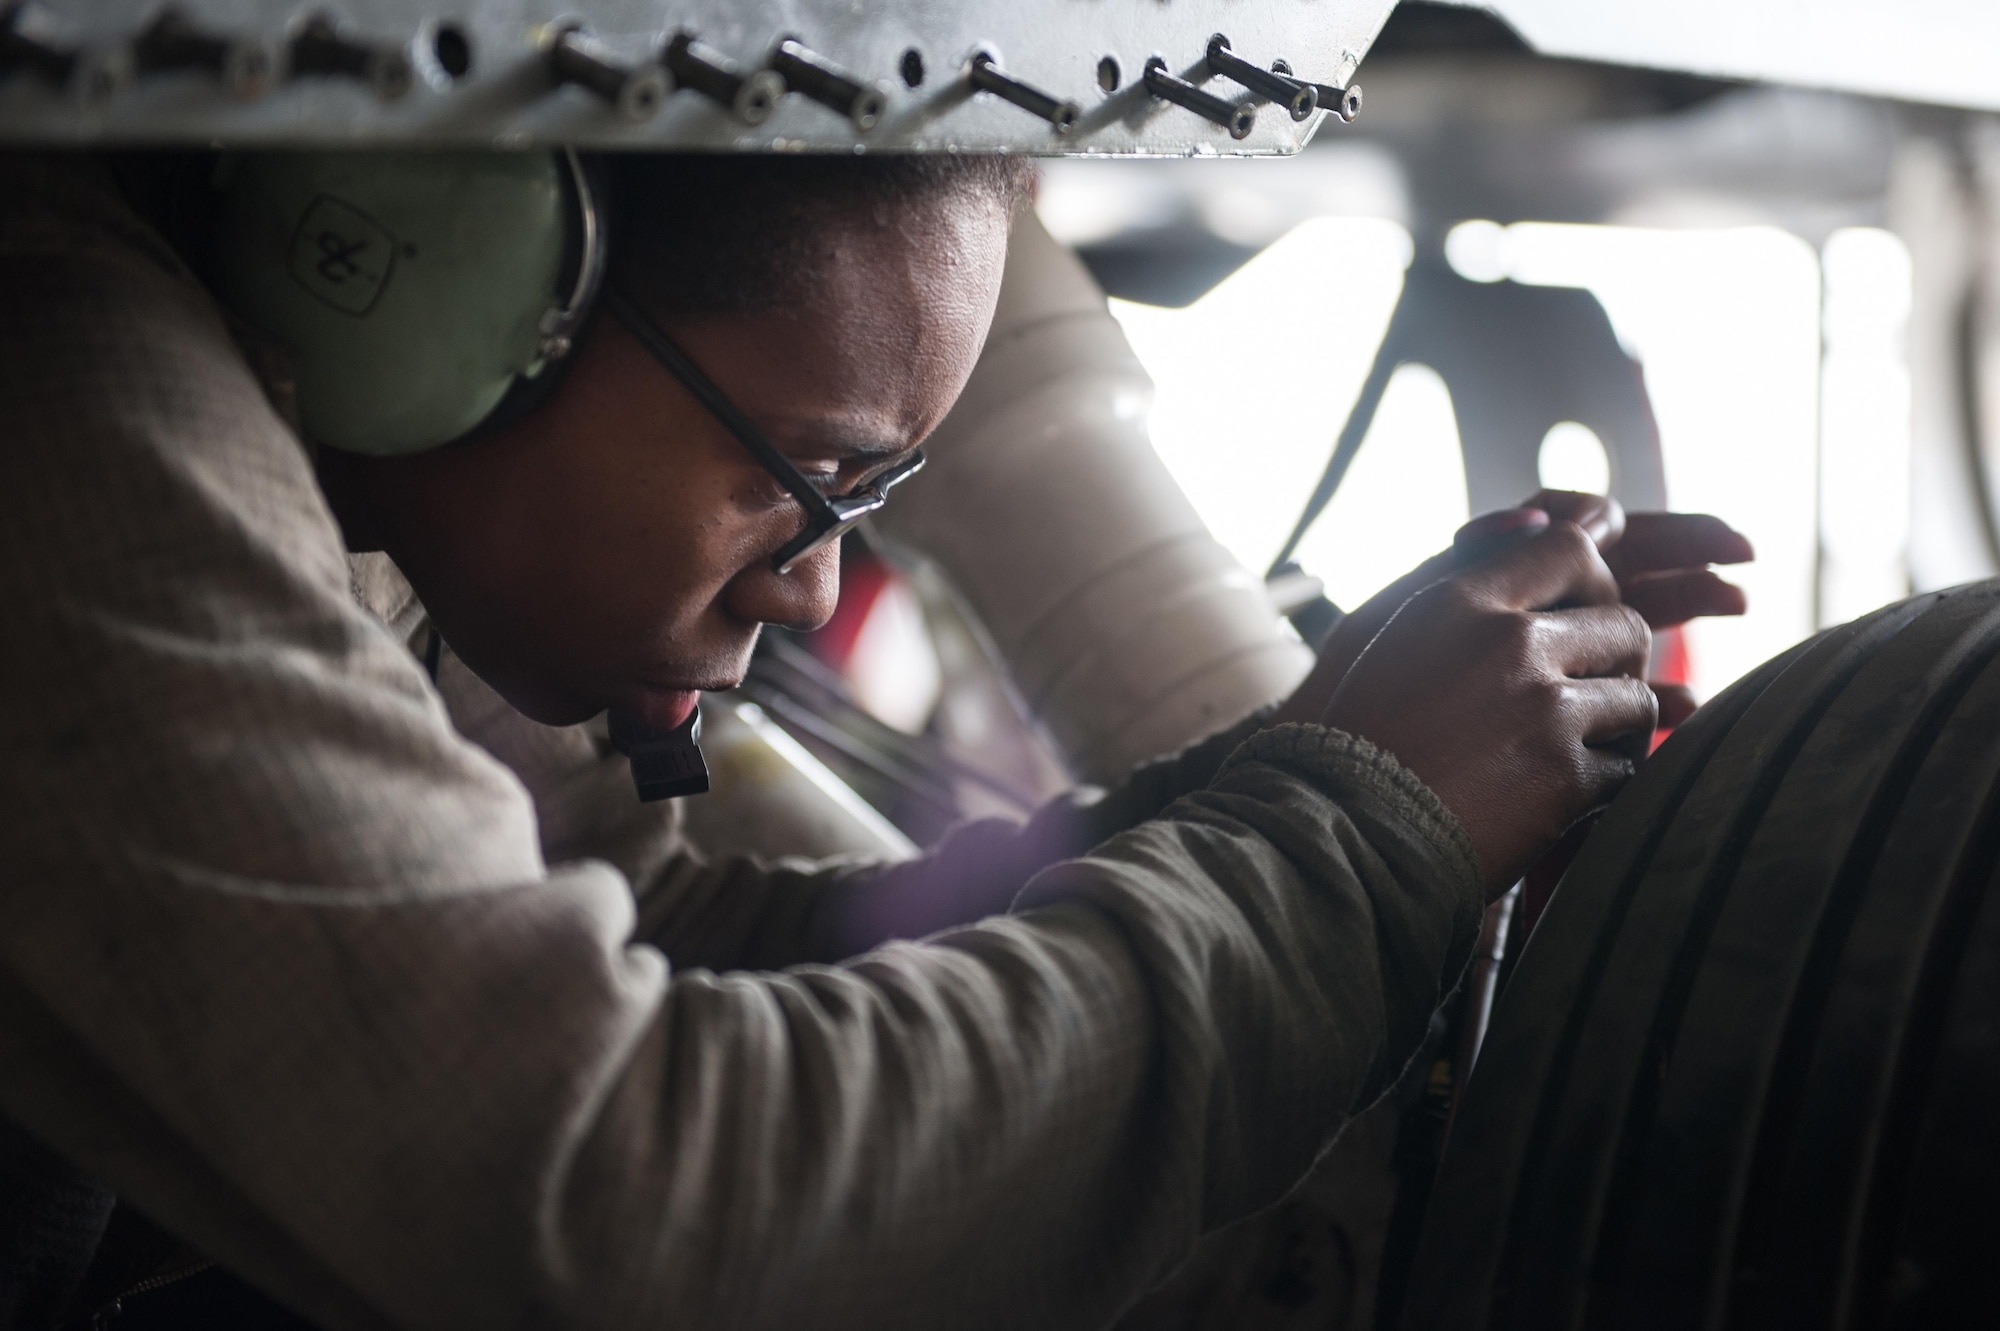 U.S. Air Force Senior Airman Kristina Manning assigned to the 455th Expeditionary Maintenance Squadron, works to complete a 400-hour phase inspection on an F-16 Fighting Falcon aircraft Oct. 18, 2015, at Bagram Airfield, Afghanistan. The 400 hour inspection lasts approximately 5 days from the time the aircraft is picked up from the flight line to the time it is returned.  (U.S. Air Force photo by Tech. Sgt. Joseph Swafford/Released)